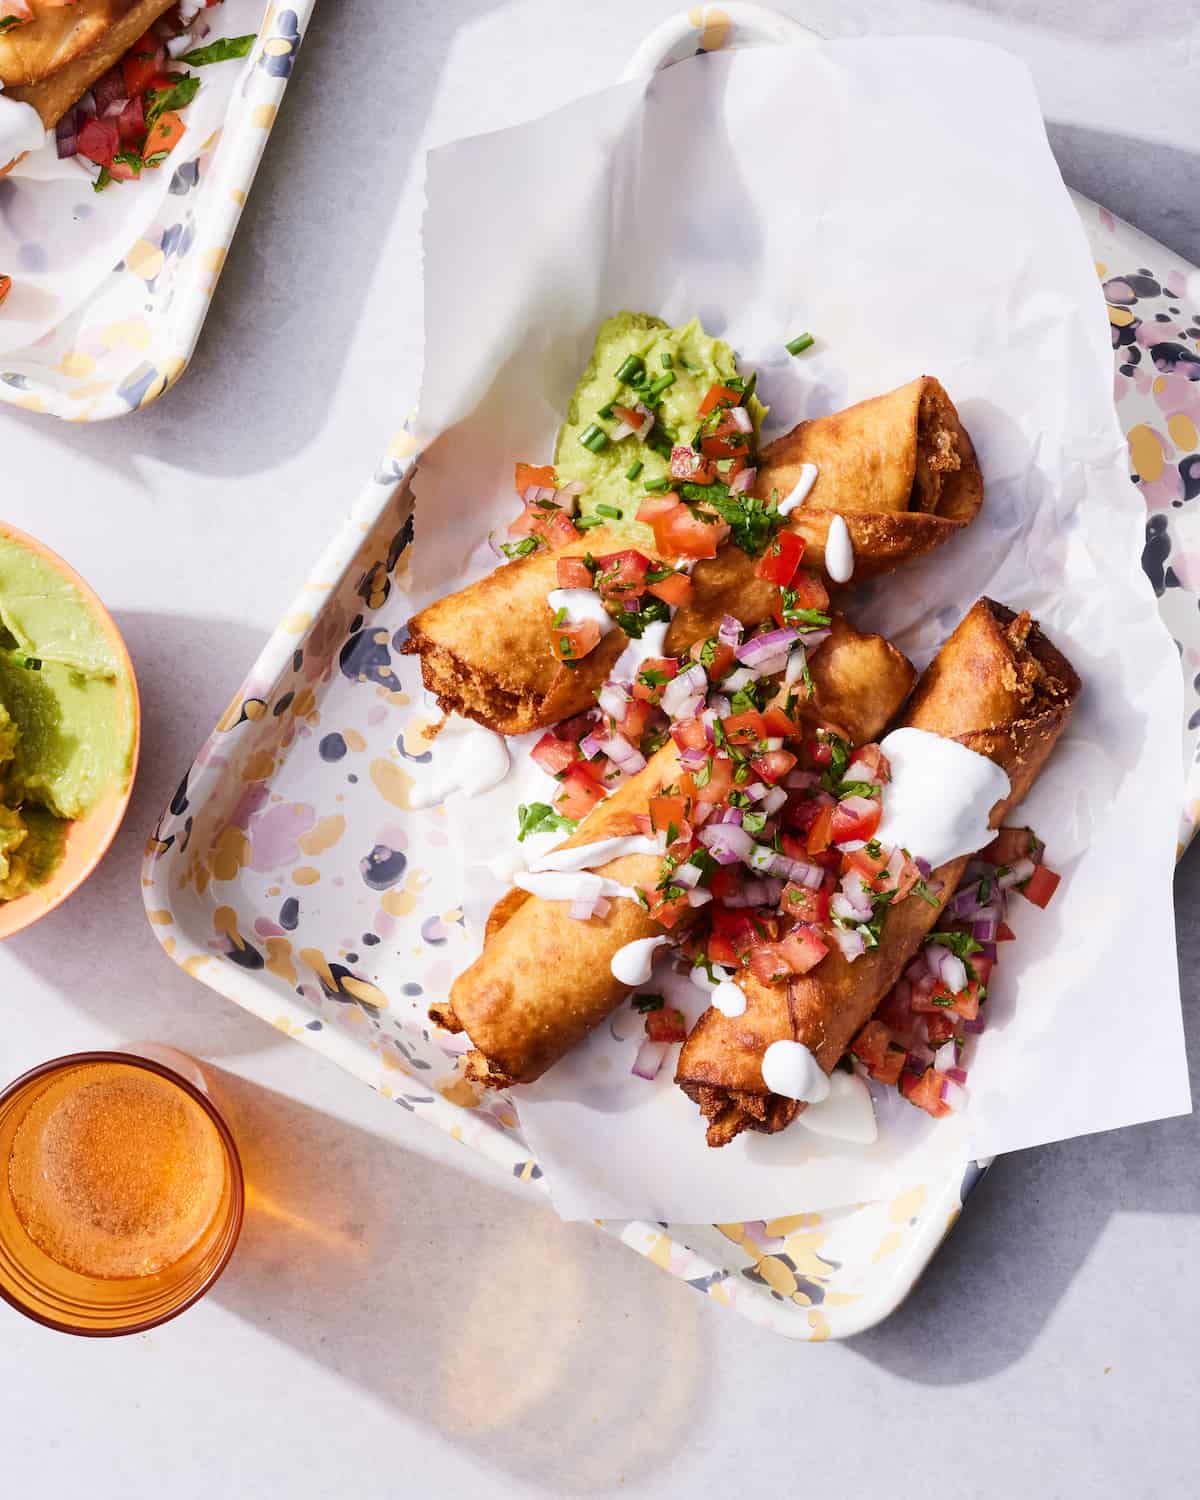 A rectangular plate with parchment paper with three chicken flautas, topped with pico de gallo, sour cream and guacamole, a similar plate on the corner of the image, a small bowl of guac and a glass of water peeping in from the side.